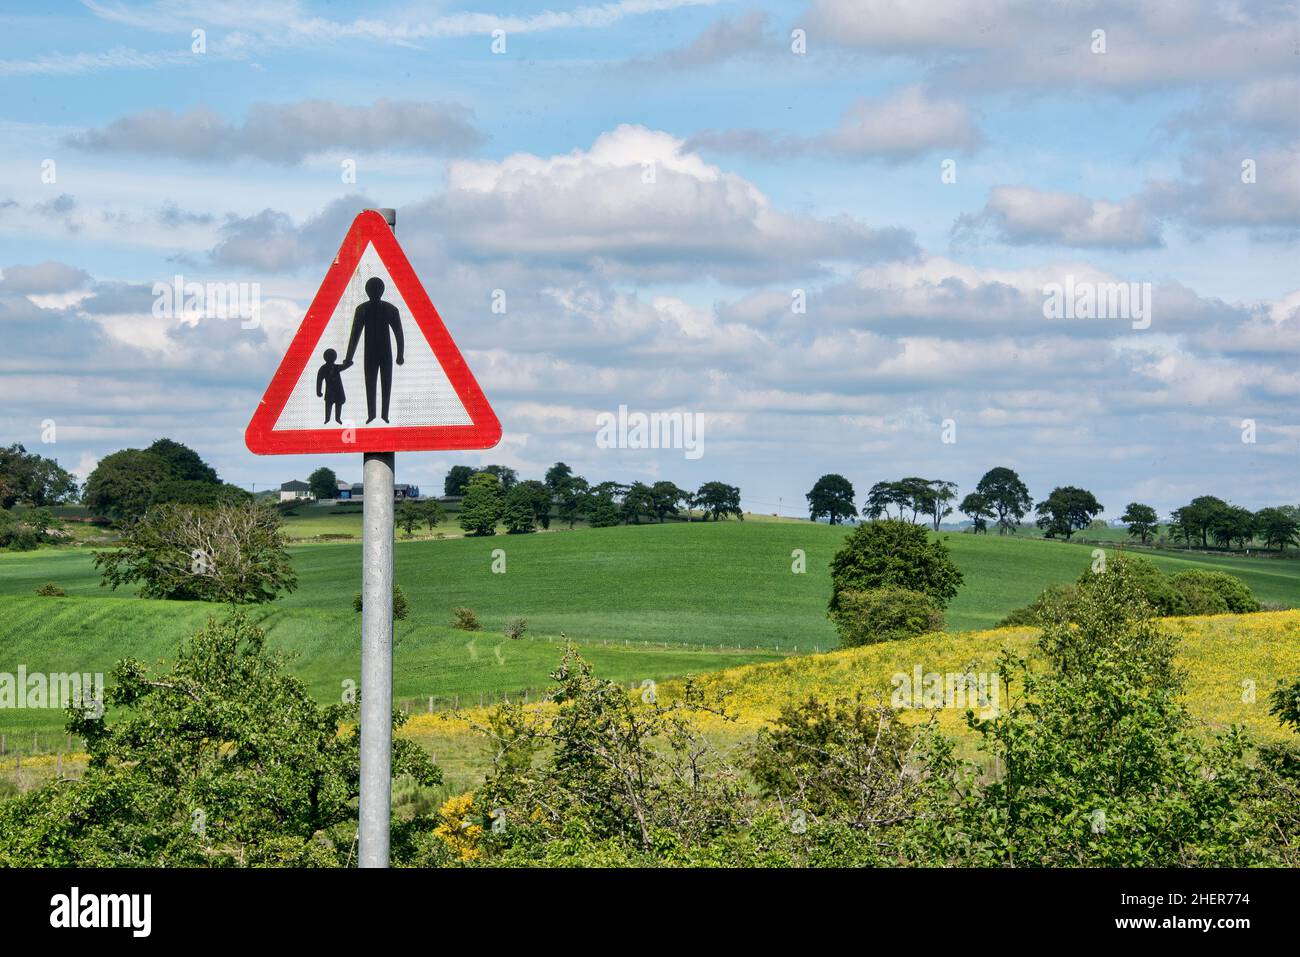 Rural scene with red triange warning sign pedestrians in road. Stock Photo